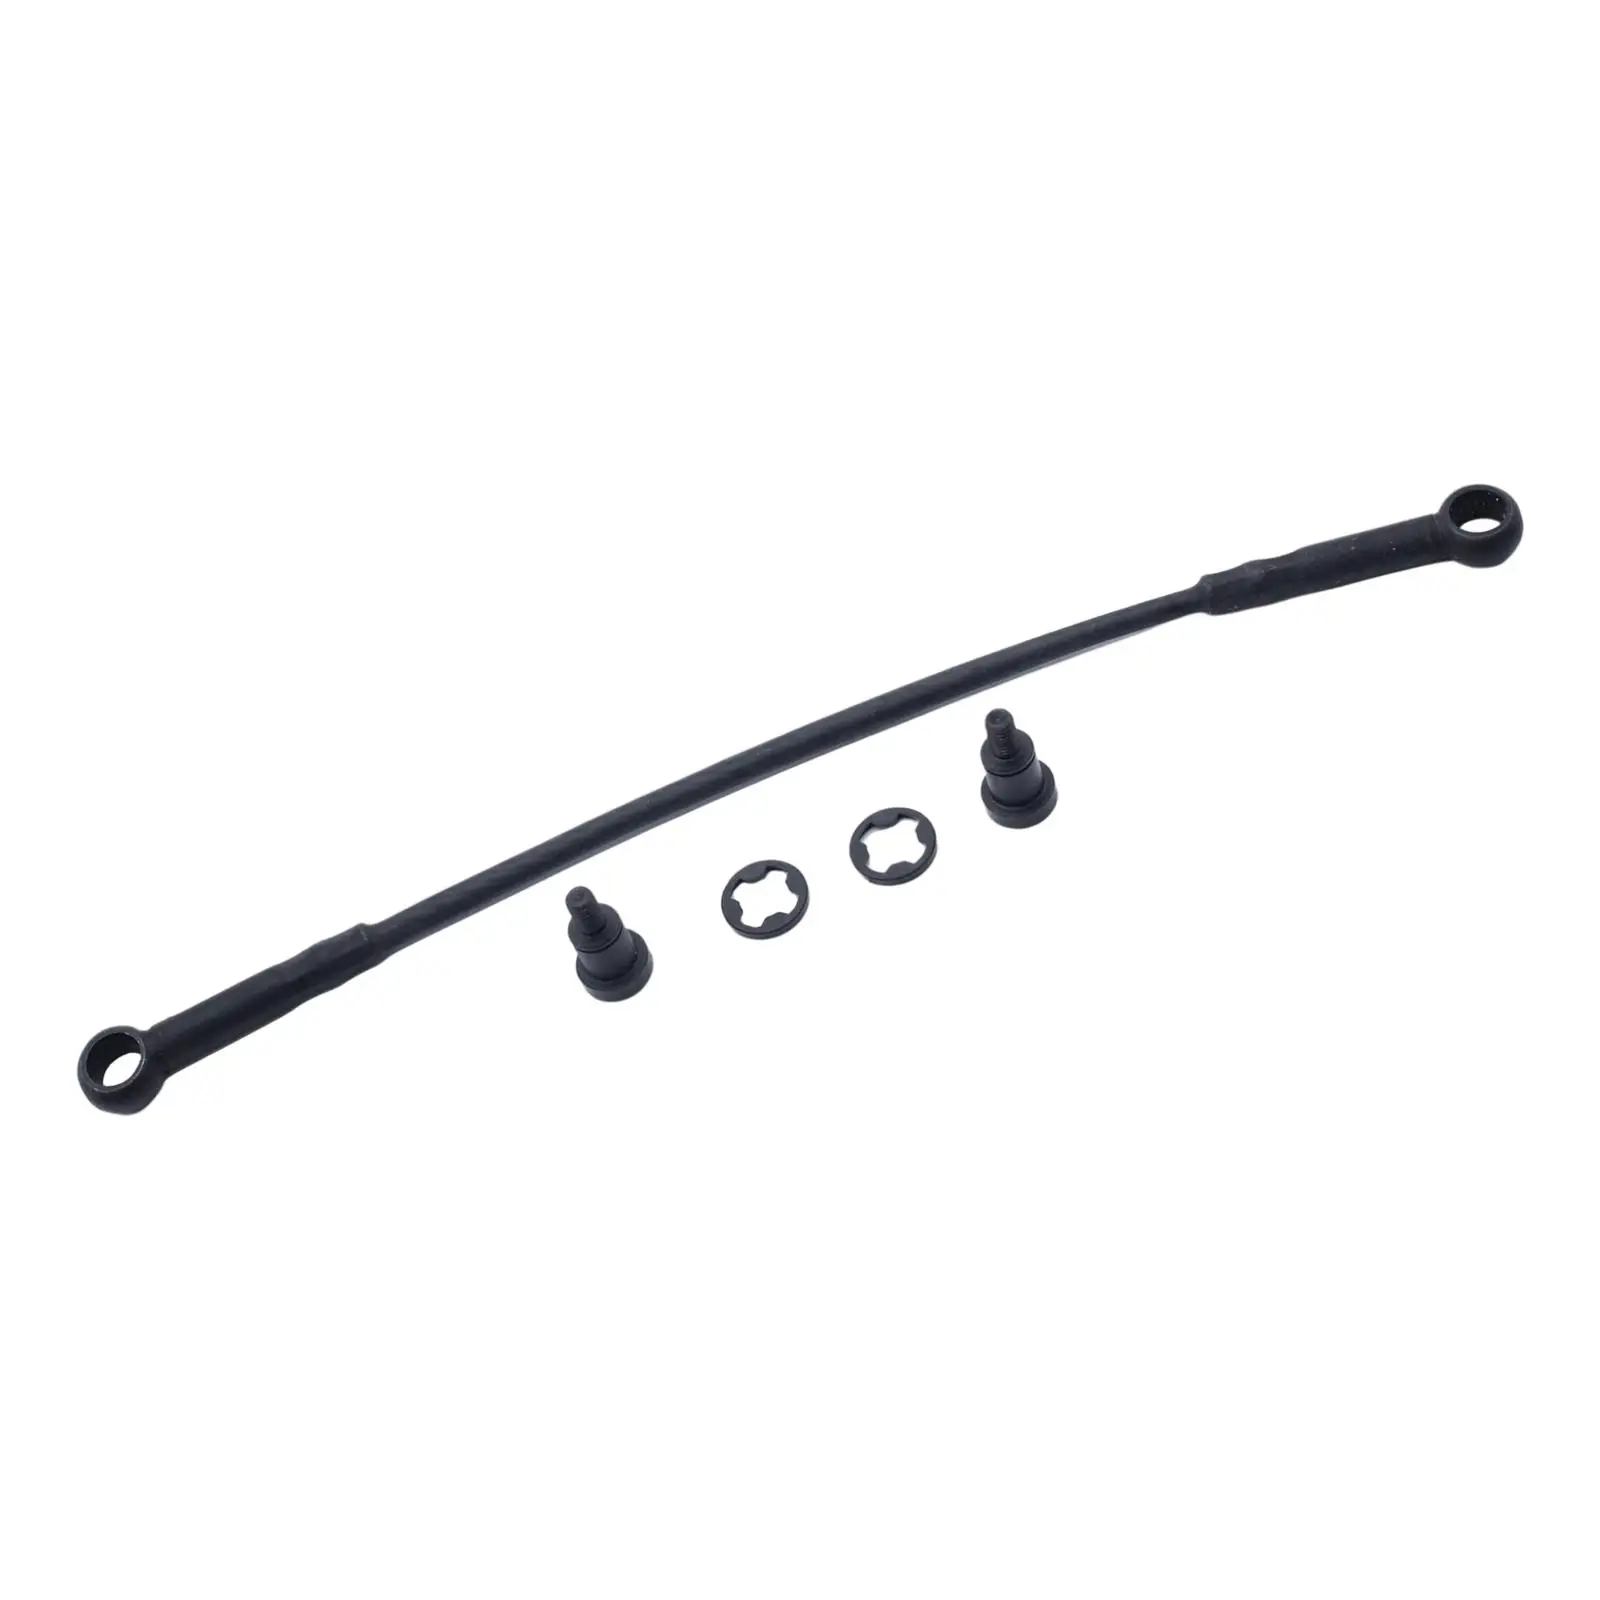 Rear Tailgate Cable 74867Sjca00 Tail Gate Replace for Ridgeline